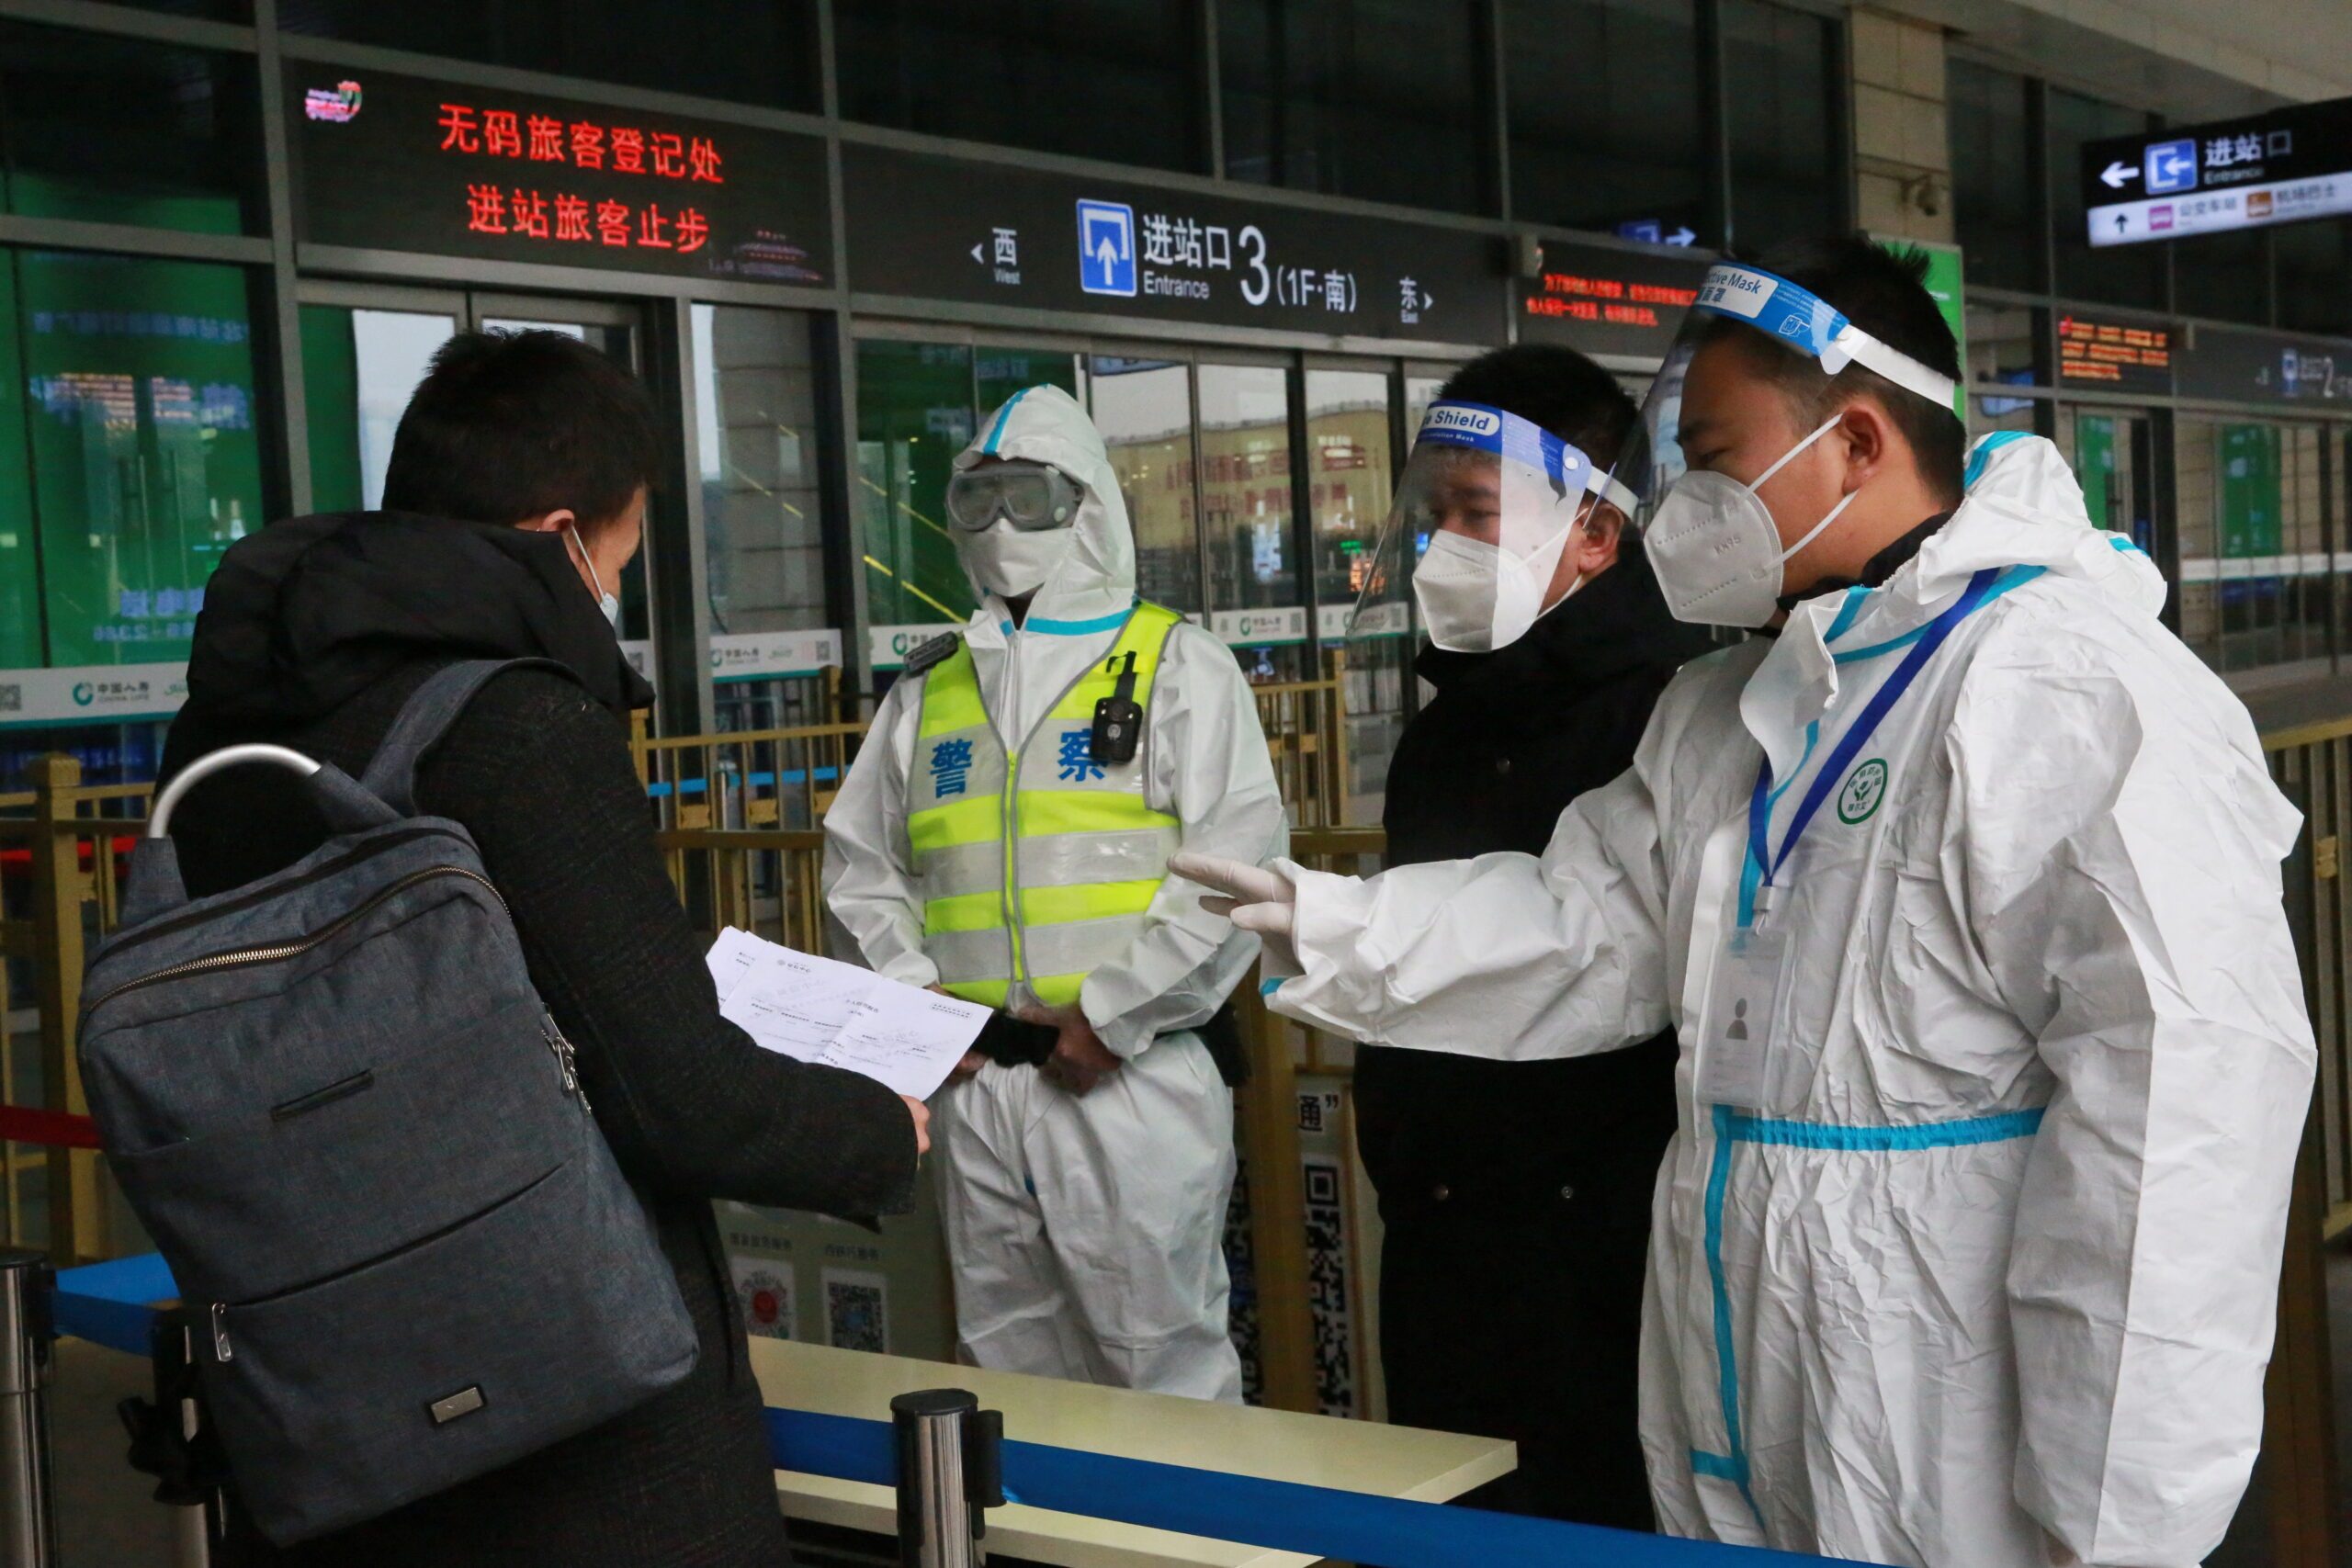 Chinese officials punished over COVID-19 outbreak that led to Xian lockdown